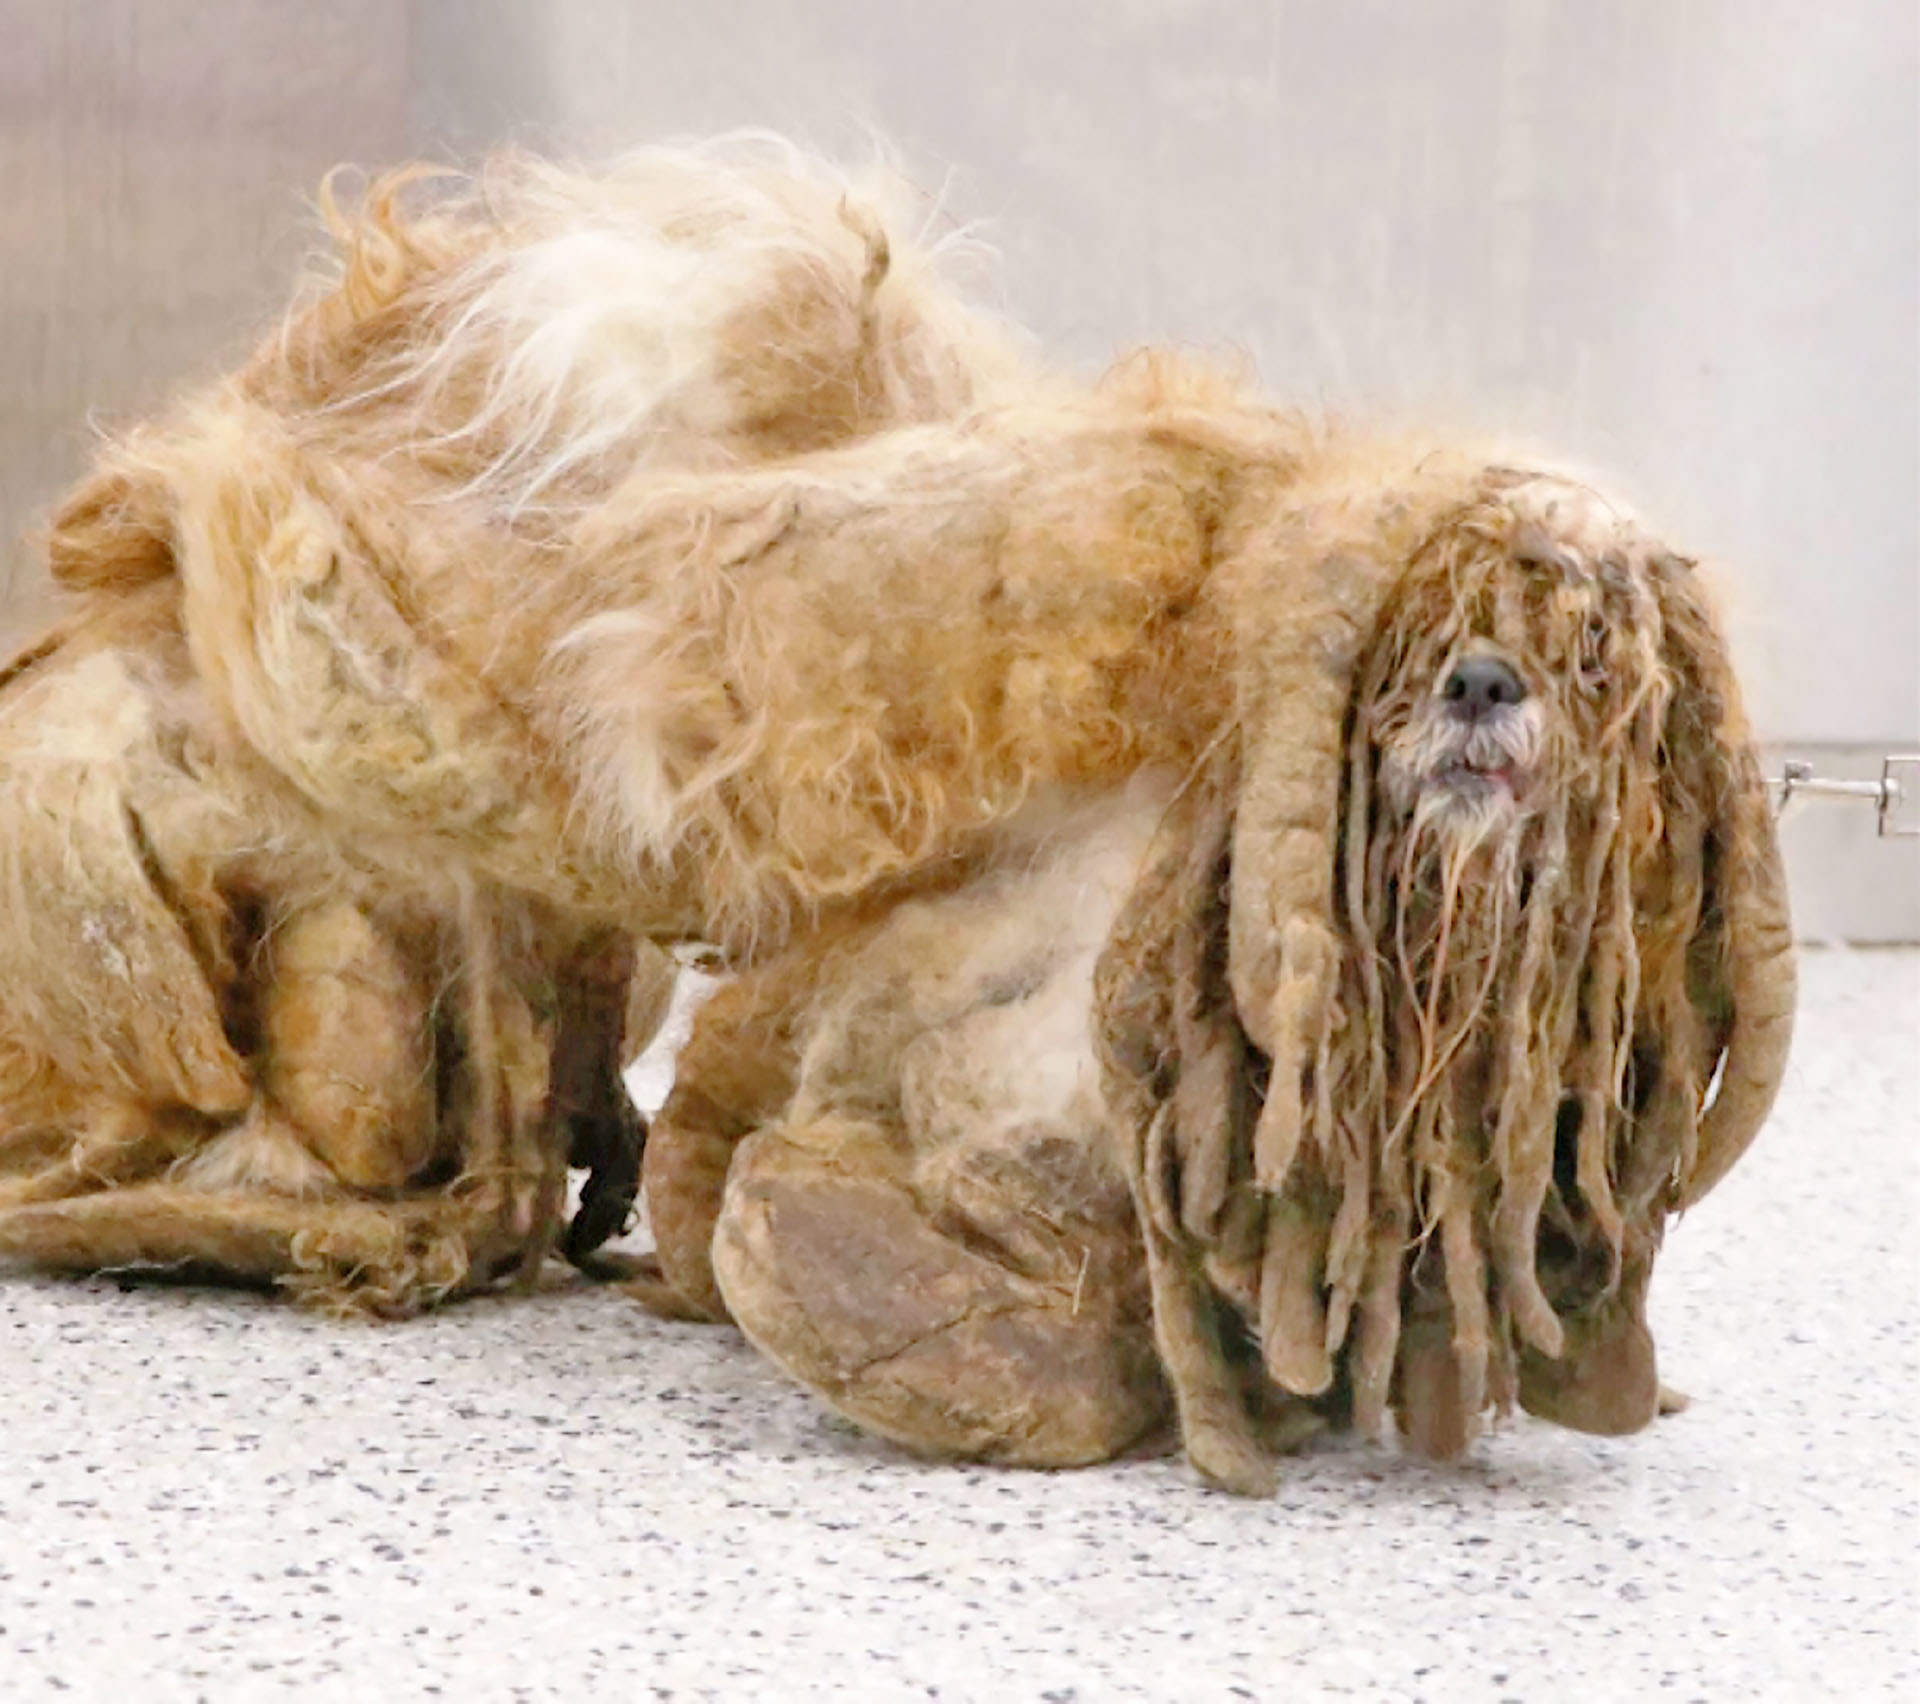 Believe it or not, there's a stray dog under this mess of hair | CNN  Business